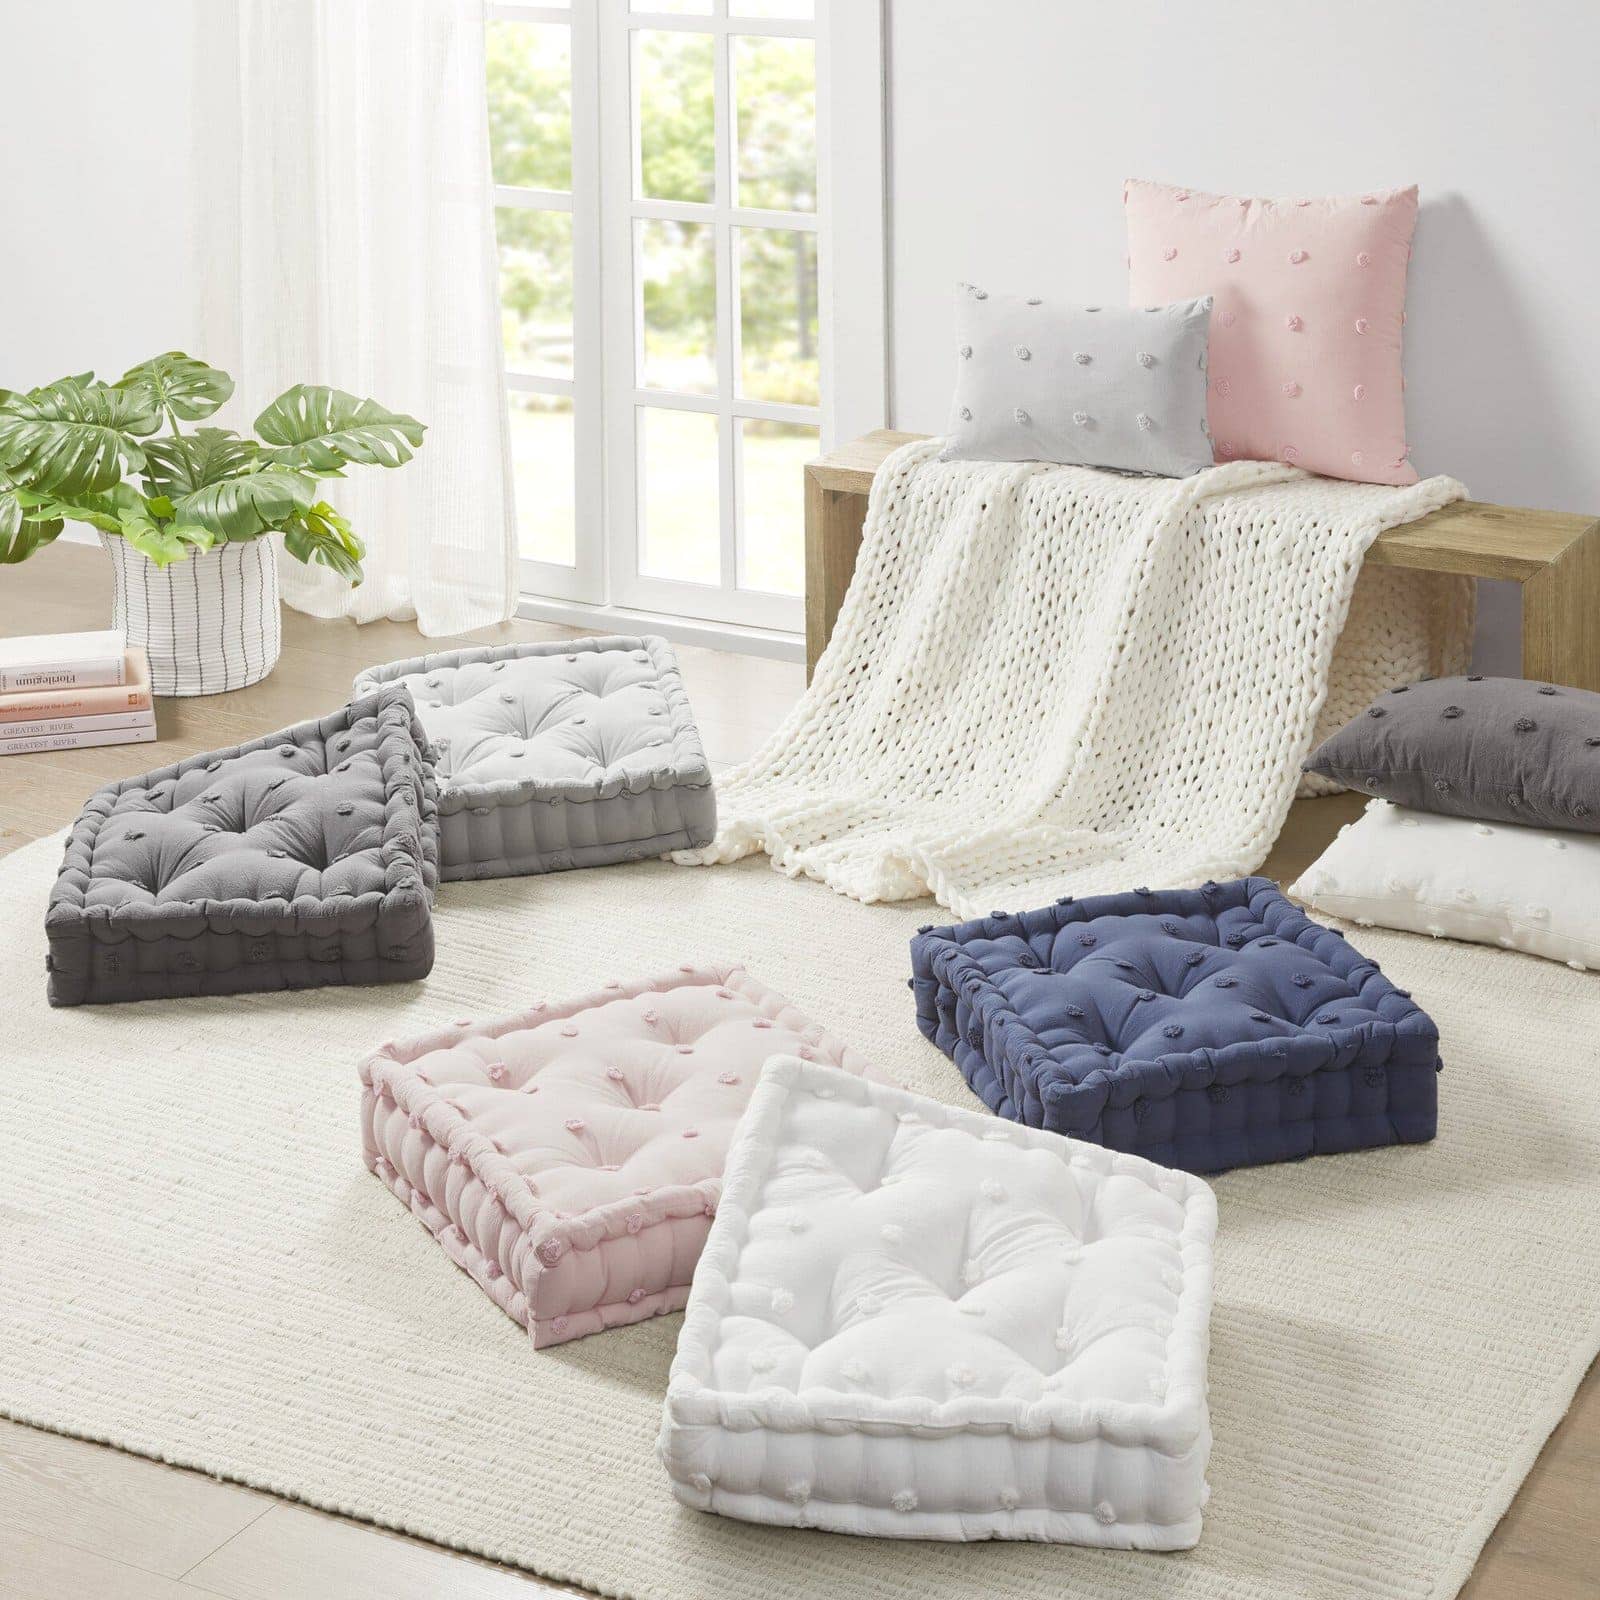 Multiuse Square Pillows for Extra Seating